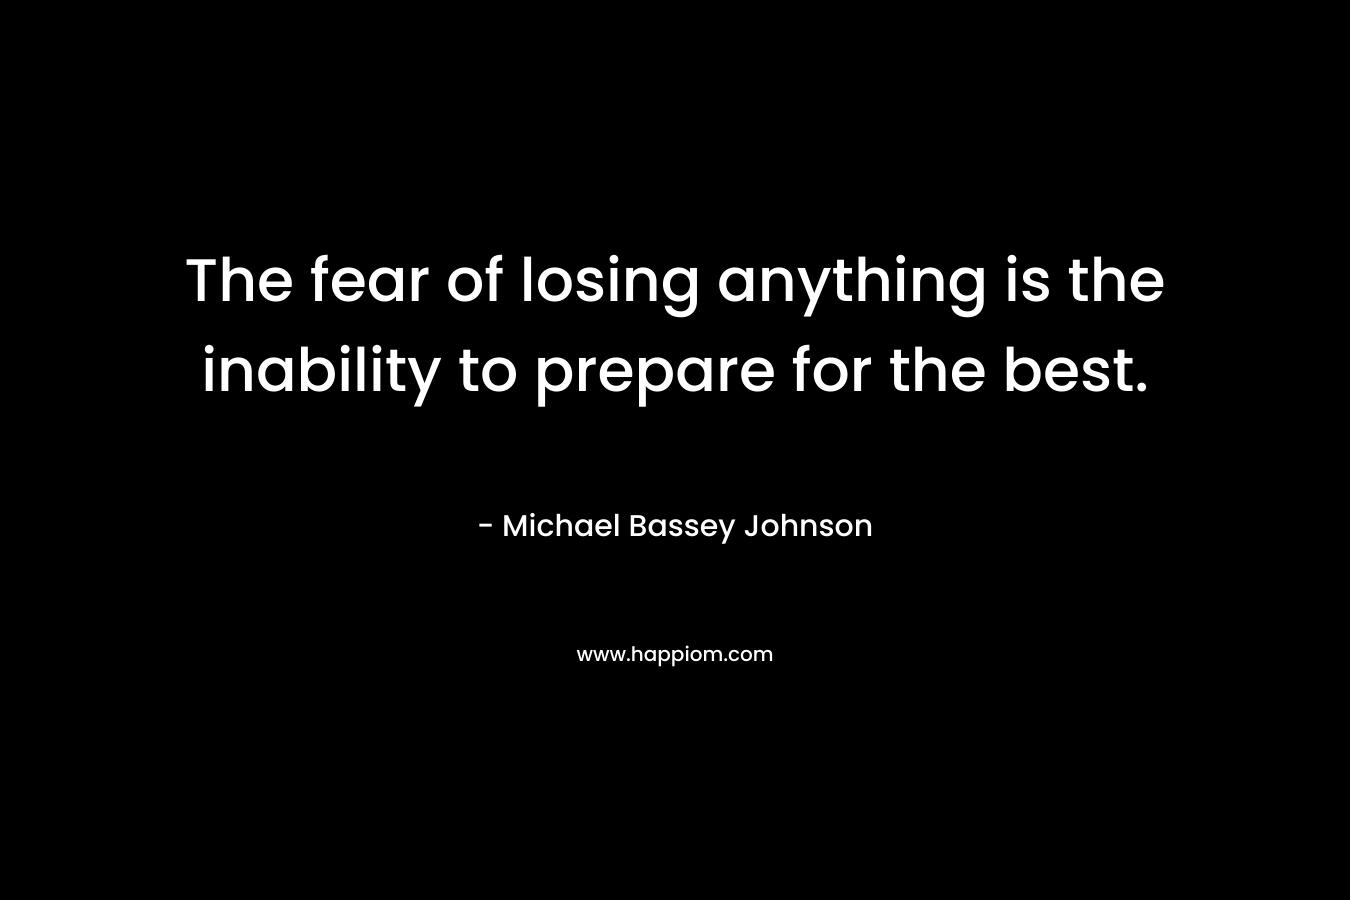 The fear of losing anything is the inability to prepare for the best.